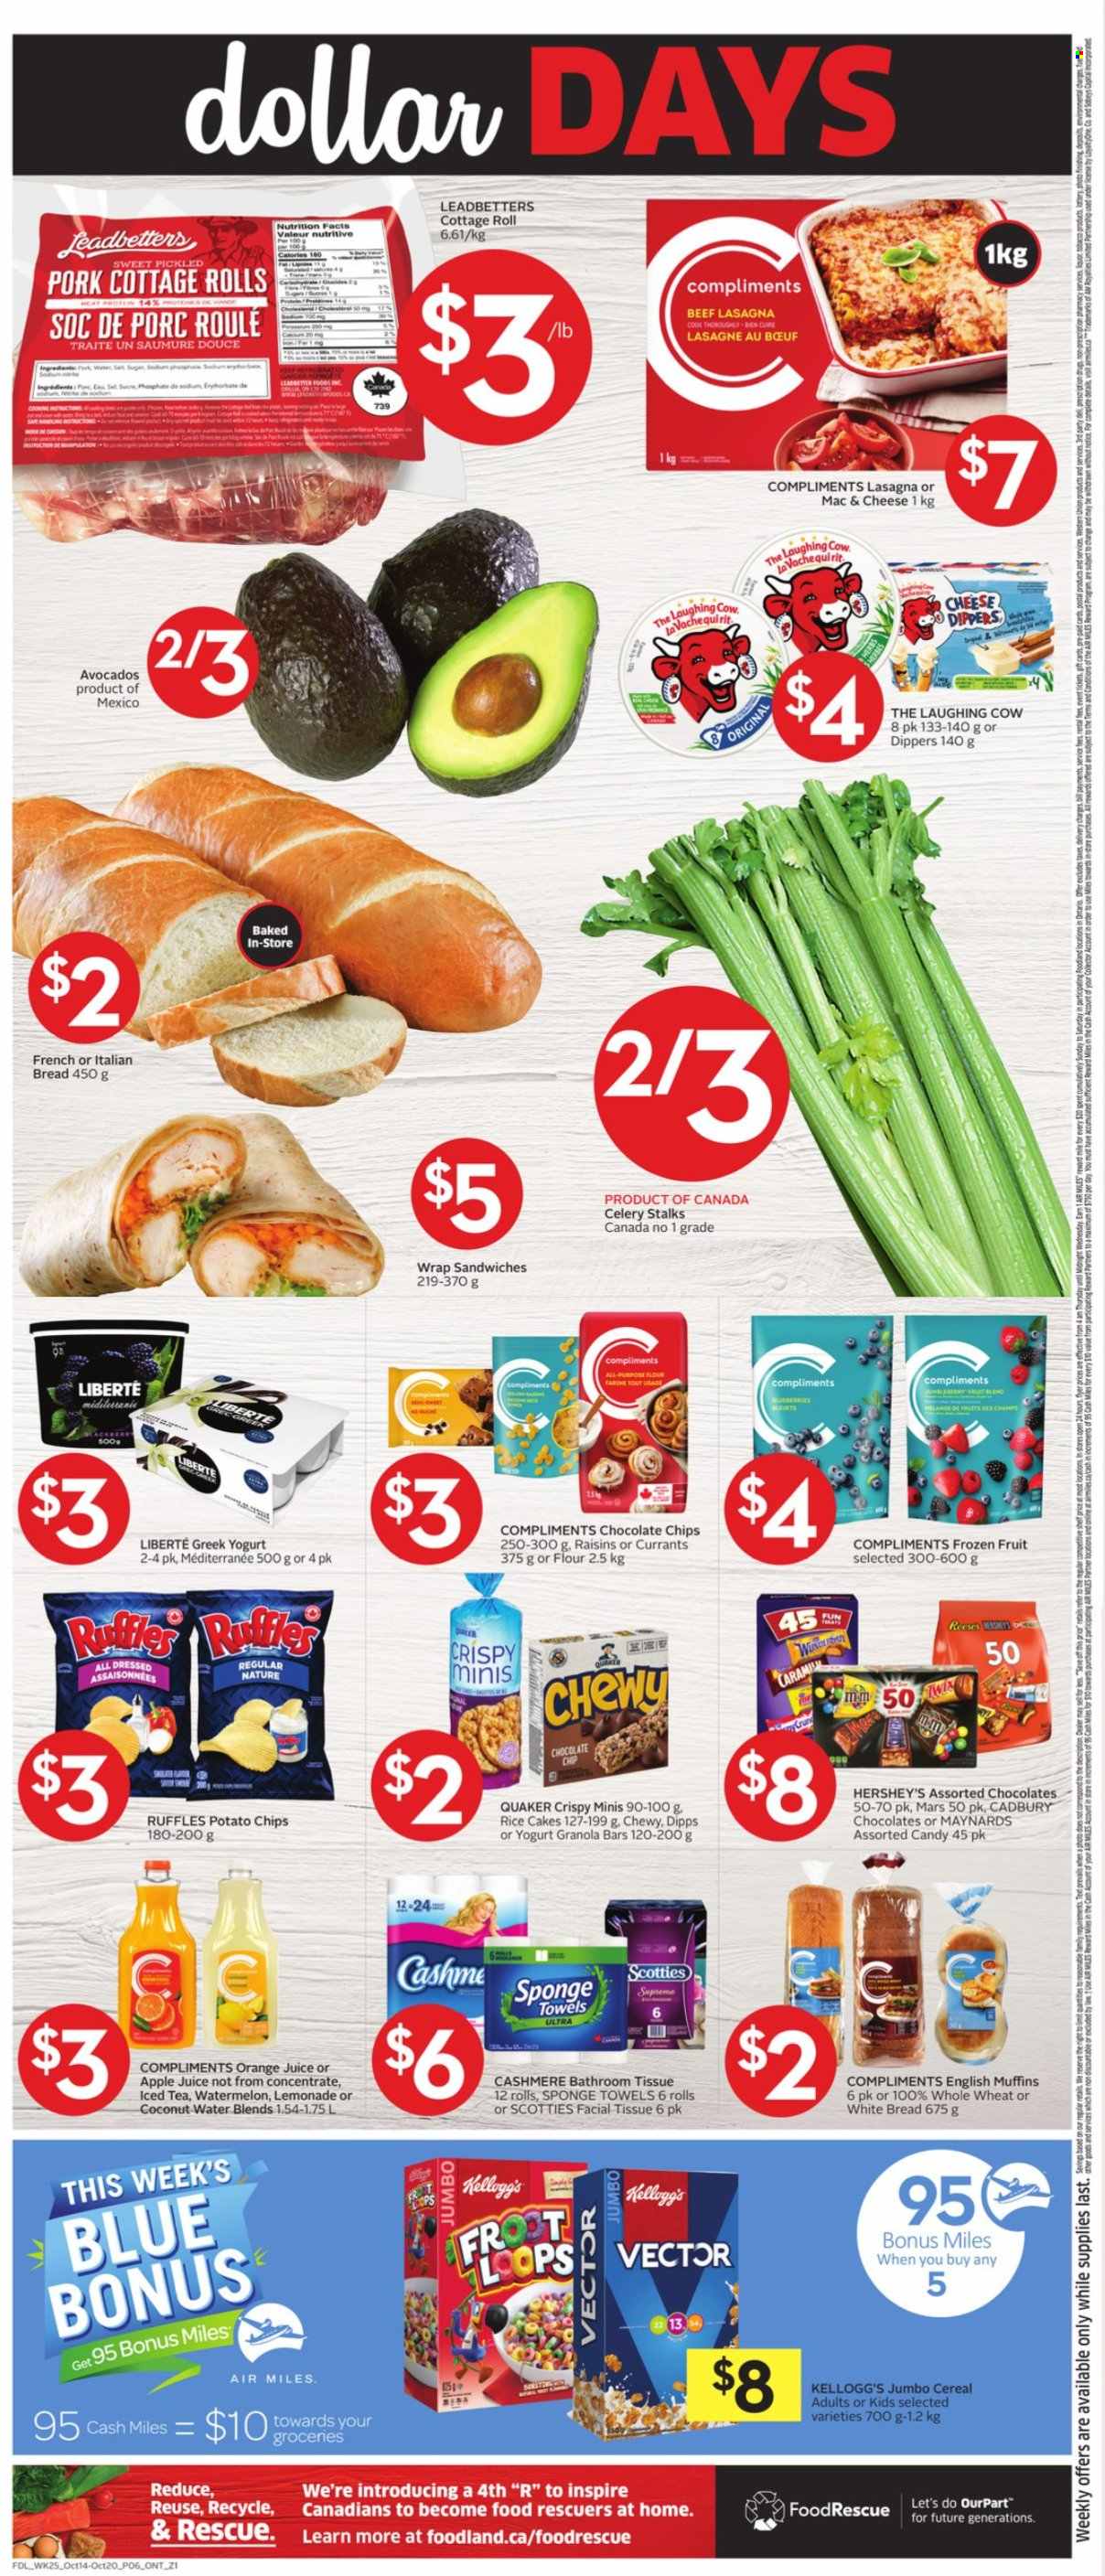 thumbnail - Foodland Flyer - October 14, 2021 - October 20, 2021 - Sales products - bread, english muffins, cake, wraps, rice cakes, celery, sleeved celery, avocado, sandwich, Quaker, lasagna meal, ready meal, pickled pork, cheese, The Laughing Cow, greek yoghurt, yoghurt, snack bar, Hershey's, frozen fruit, Mars, Kellogg's, Cadbury, Candy, sweets, bars, potato chips, Ruffles, rice crisps, flour, granola bar, currants, apple juice, lemonade, orange juice, juice, ice tea, coconut water, bath tissue, kitchen towels, paper towels, facial tissues. Page 8.